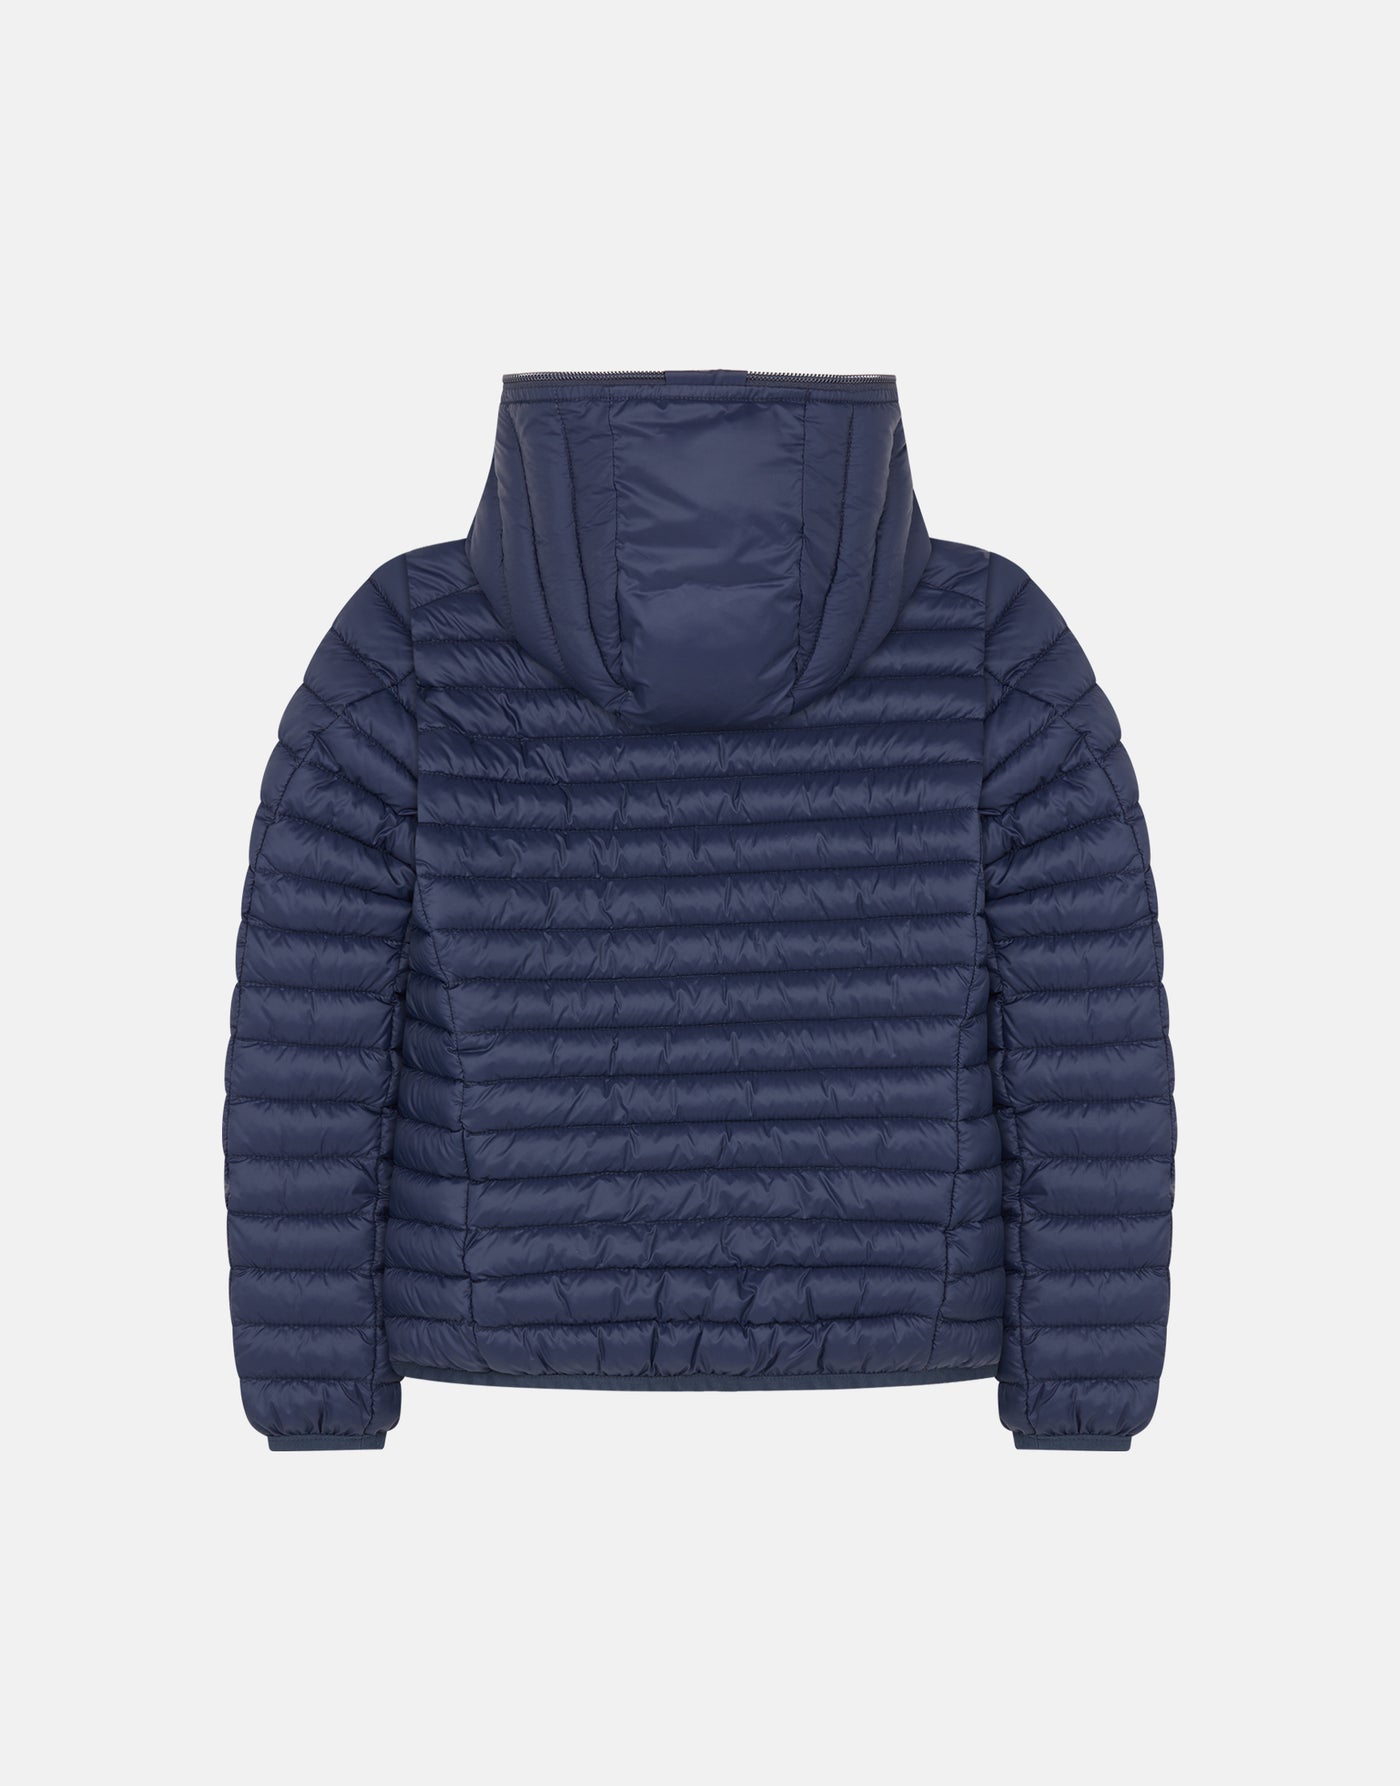 Back View of Girls' Lily Hooded Puffer Jacket in Navy Blue